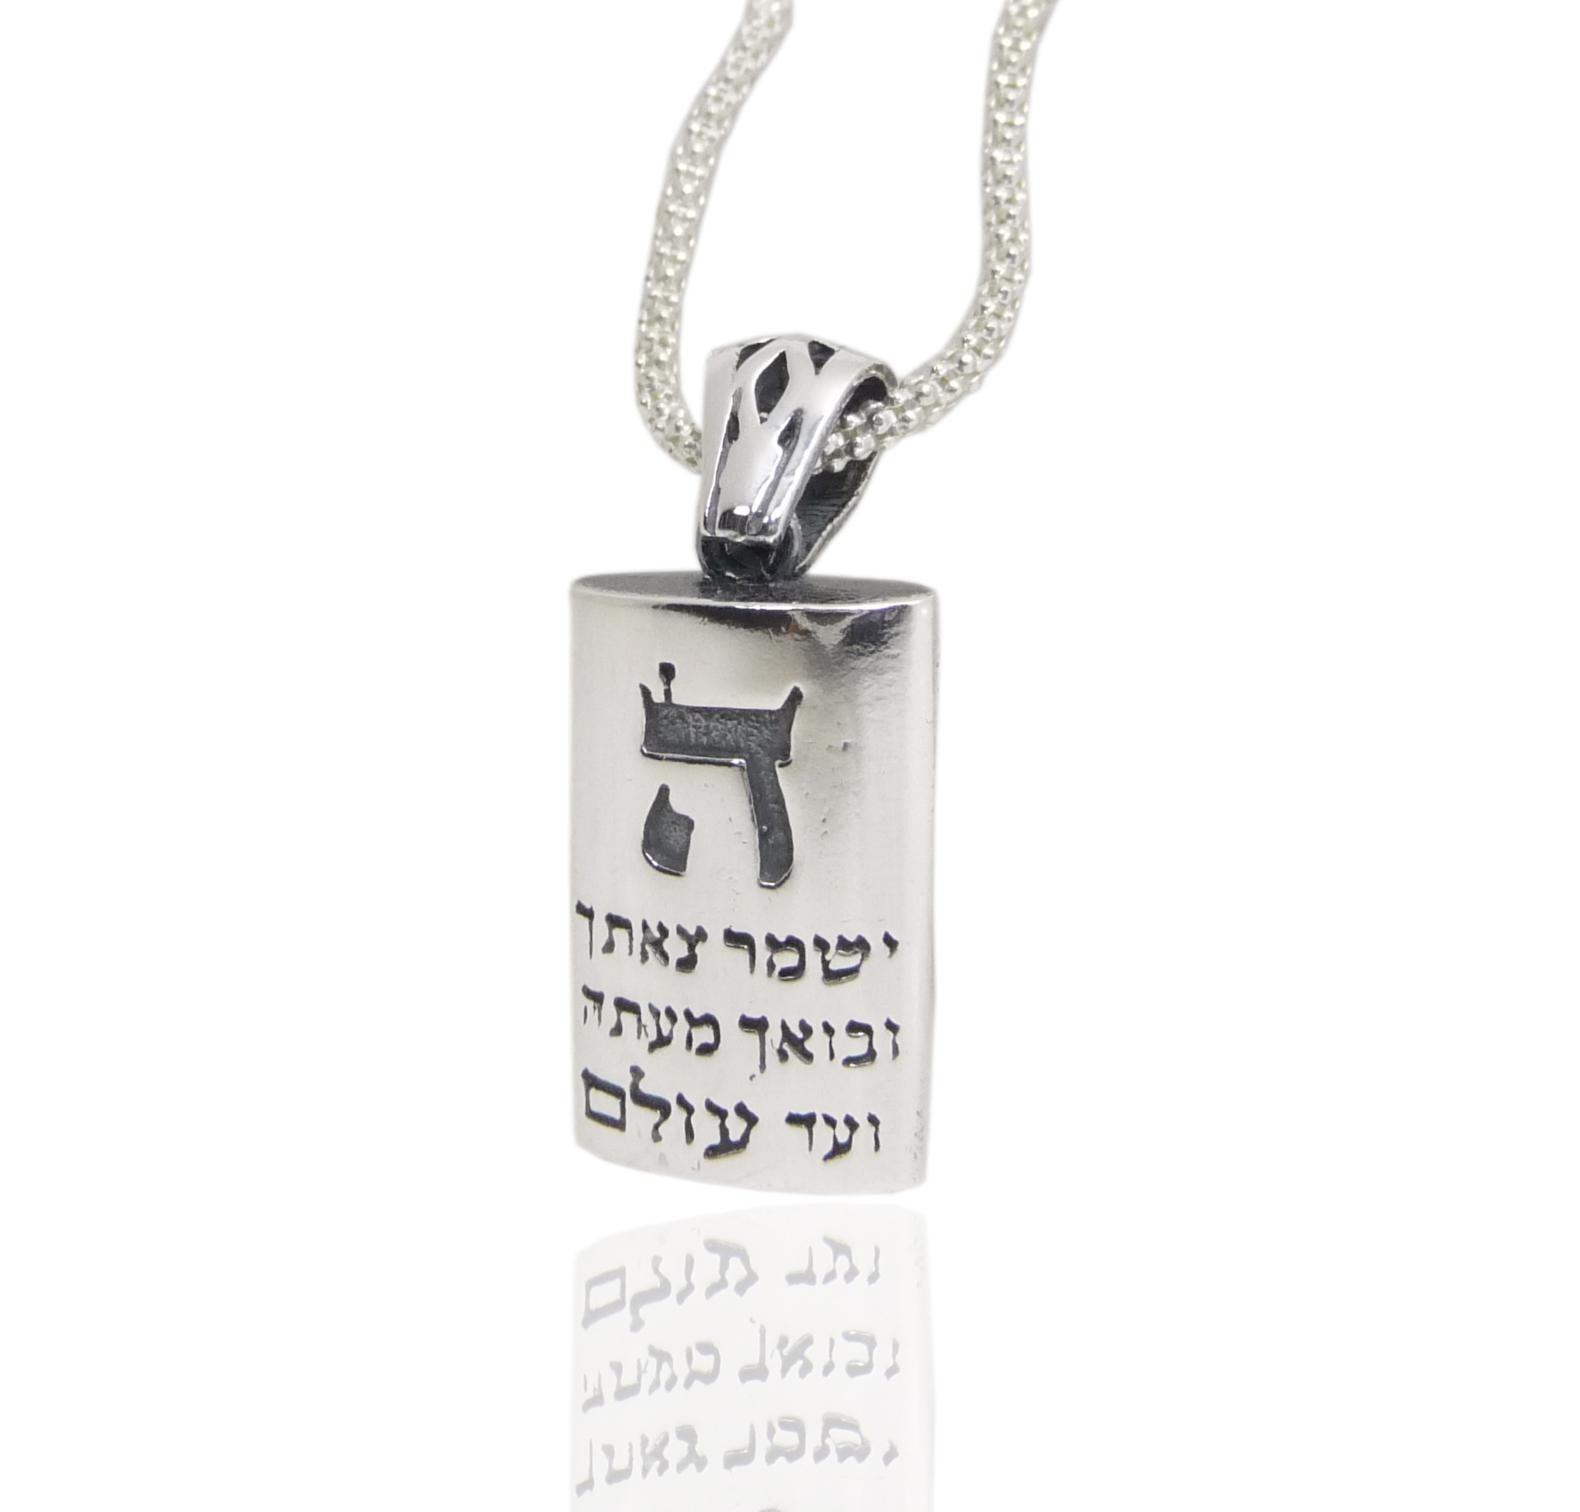 Dorit Judaica Bring Them Home Dog Tag Necklace, Jewish Gifts from Israel